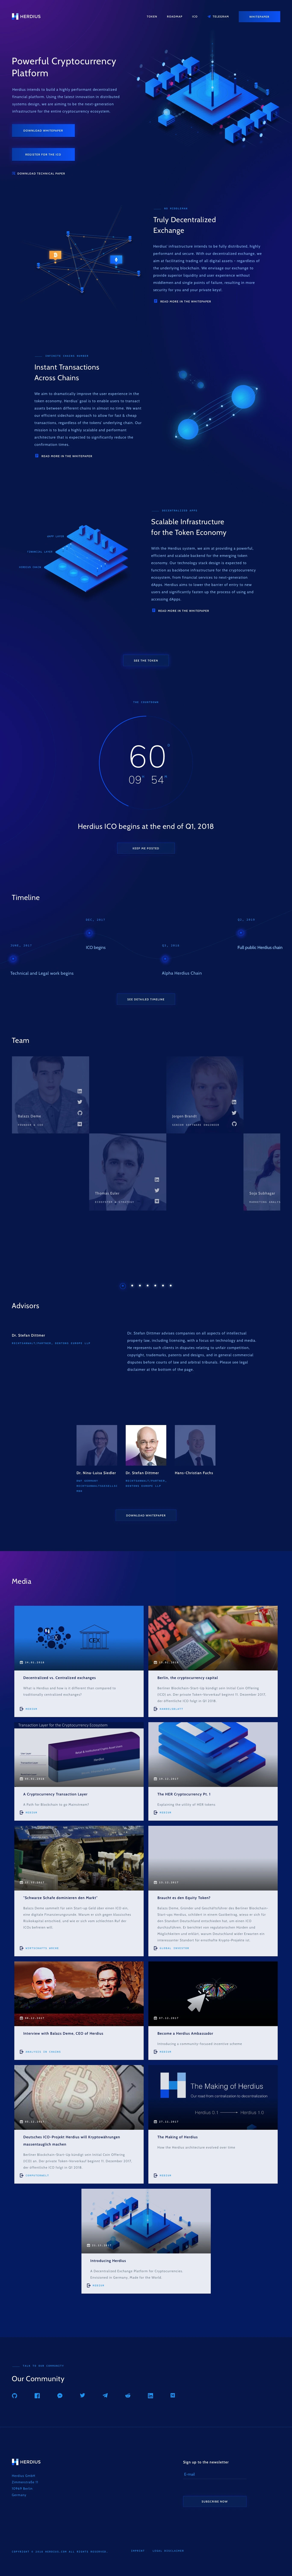 Herdius Landing Page Example: Herdius intends to build a highly performant decentralized financial platform. Using the latest innovation in distributed systems design, we are aiming to be the next-generation infrastructure for the entire cryptocurrency ecosystem.